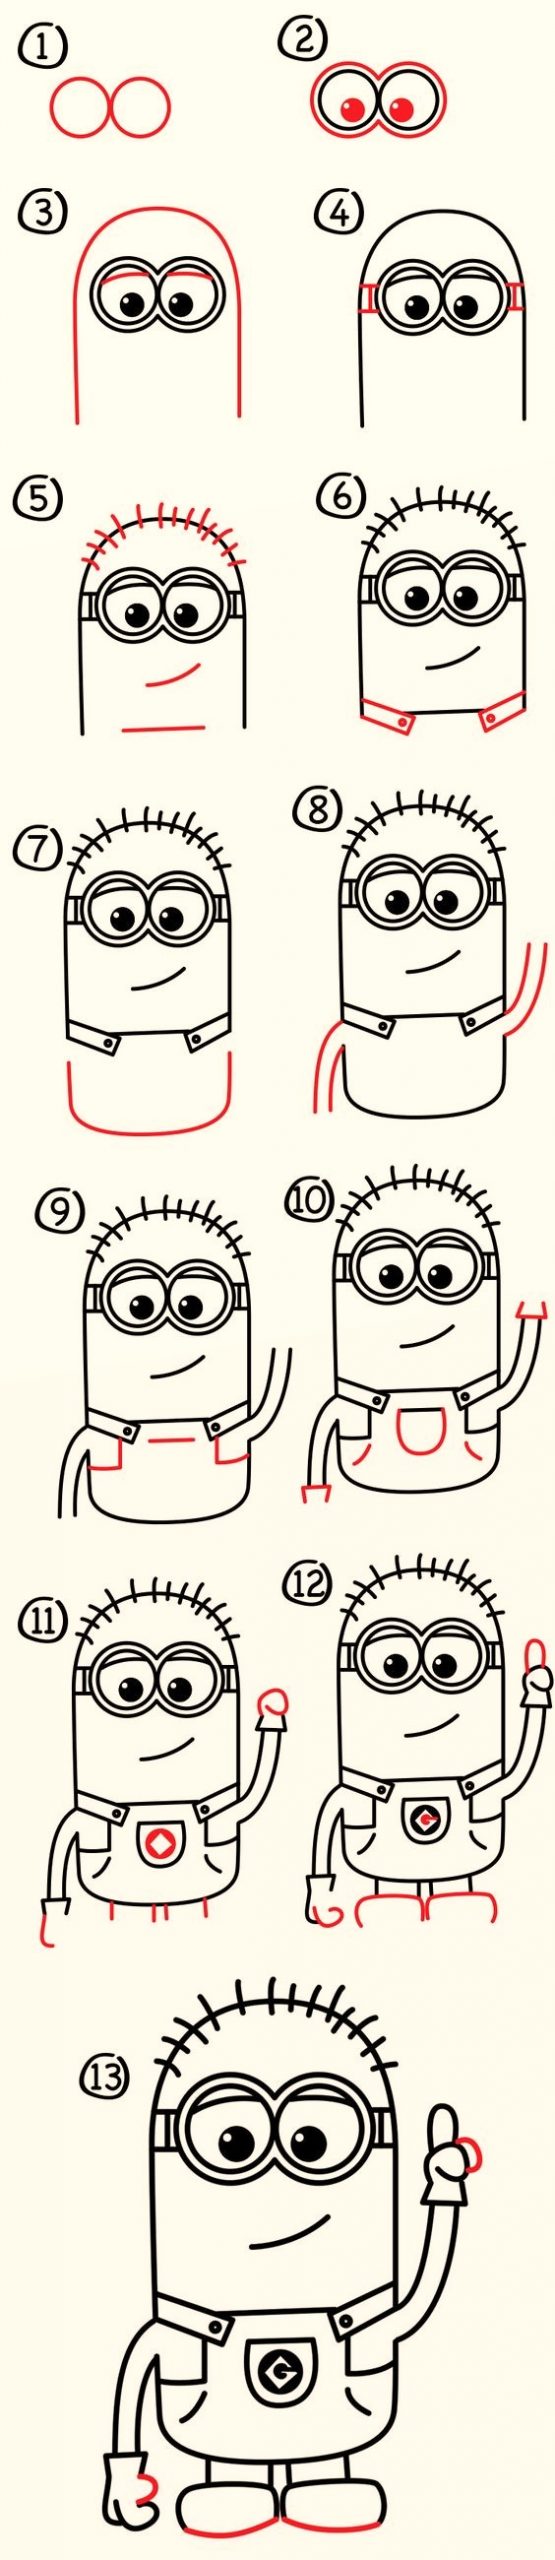 Minion - Step by Step Guide to Draw